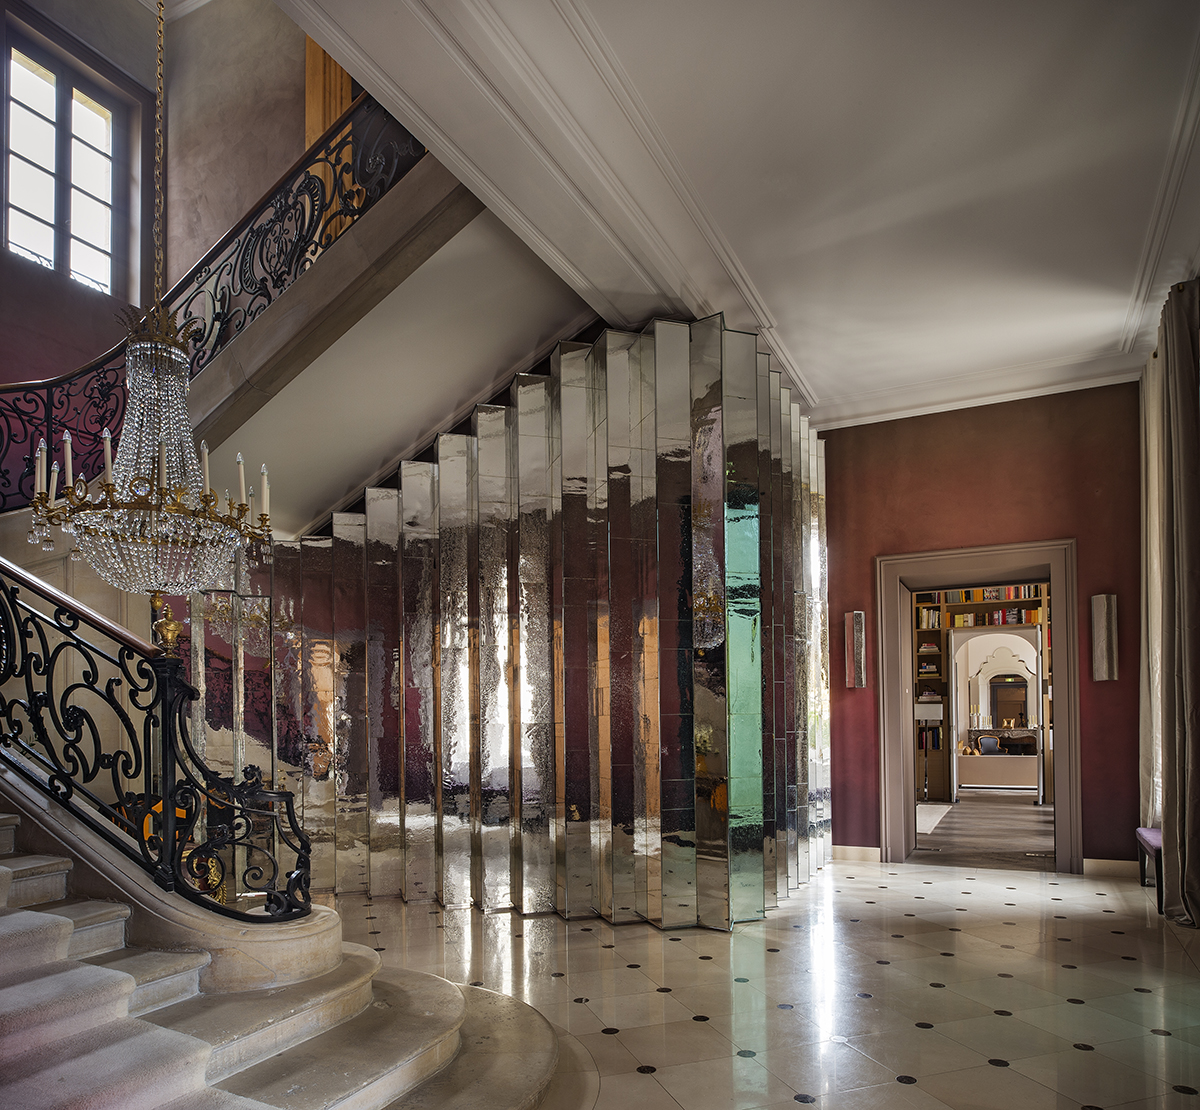 A hallway with a marble floor and staircase